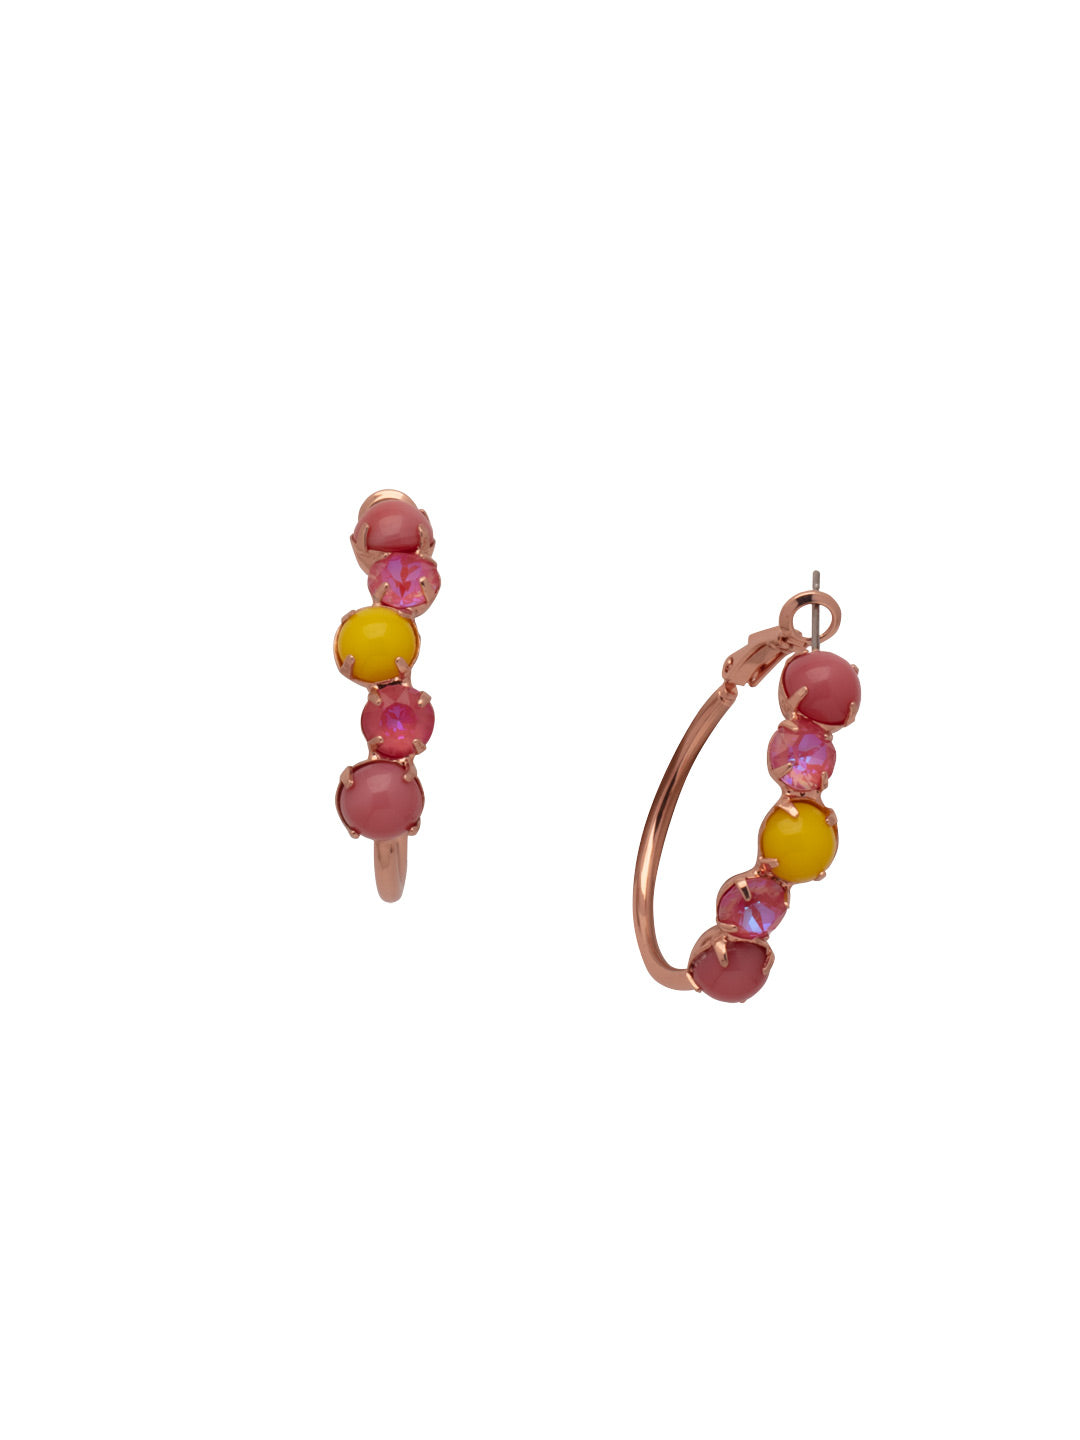 Xena Hoop Earrings - EFF112RGPPN - <p>The Xena Hoop Earrings feature small round cut crystals and semi-precious stones on a classic metal hoop. From Sorrelli's Pink Pineapple collection in our Rose Gold-tone finish.</p>